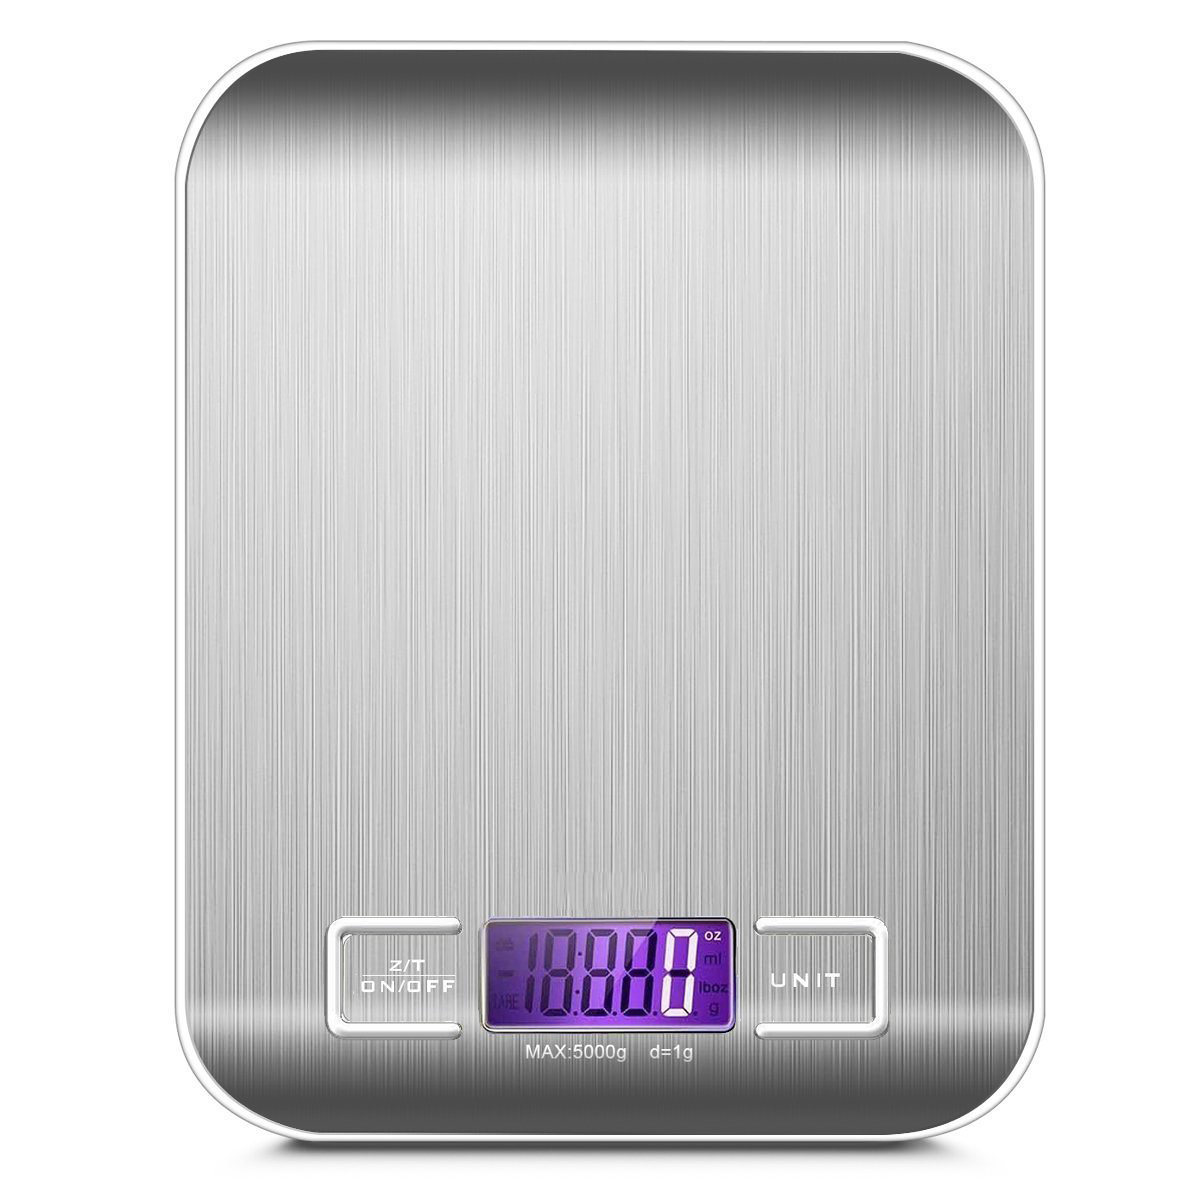 JOBLOT LCD Display Digital Kitchen Scale Joblot Weighing Scales 5KG - 50pcs